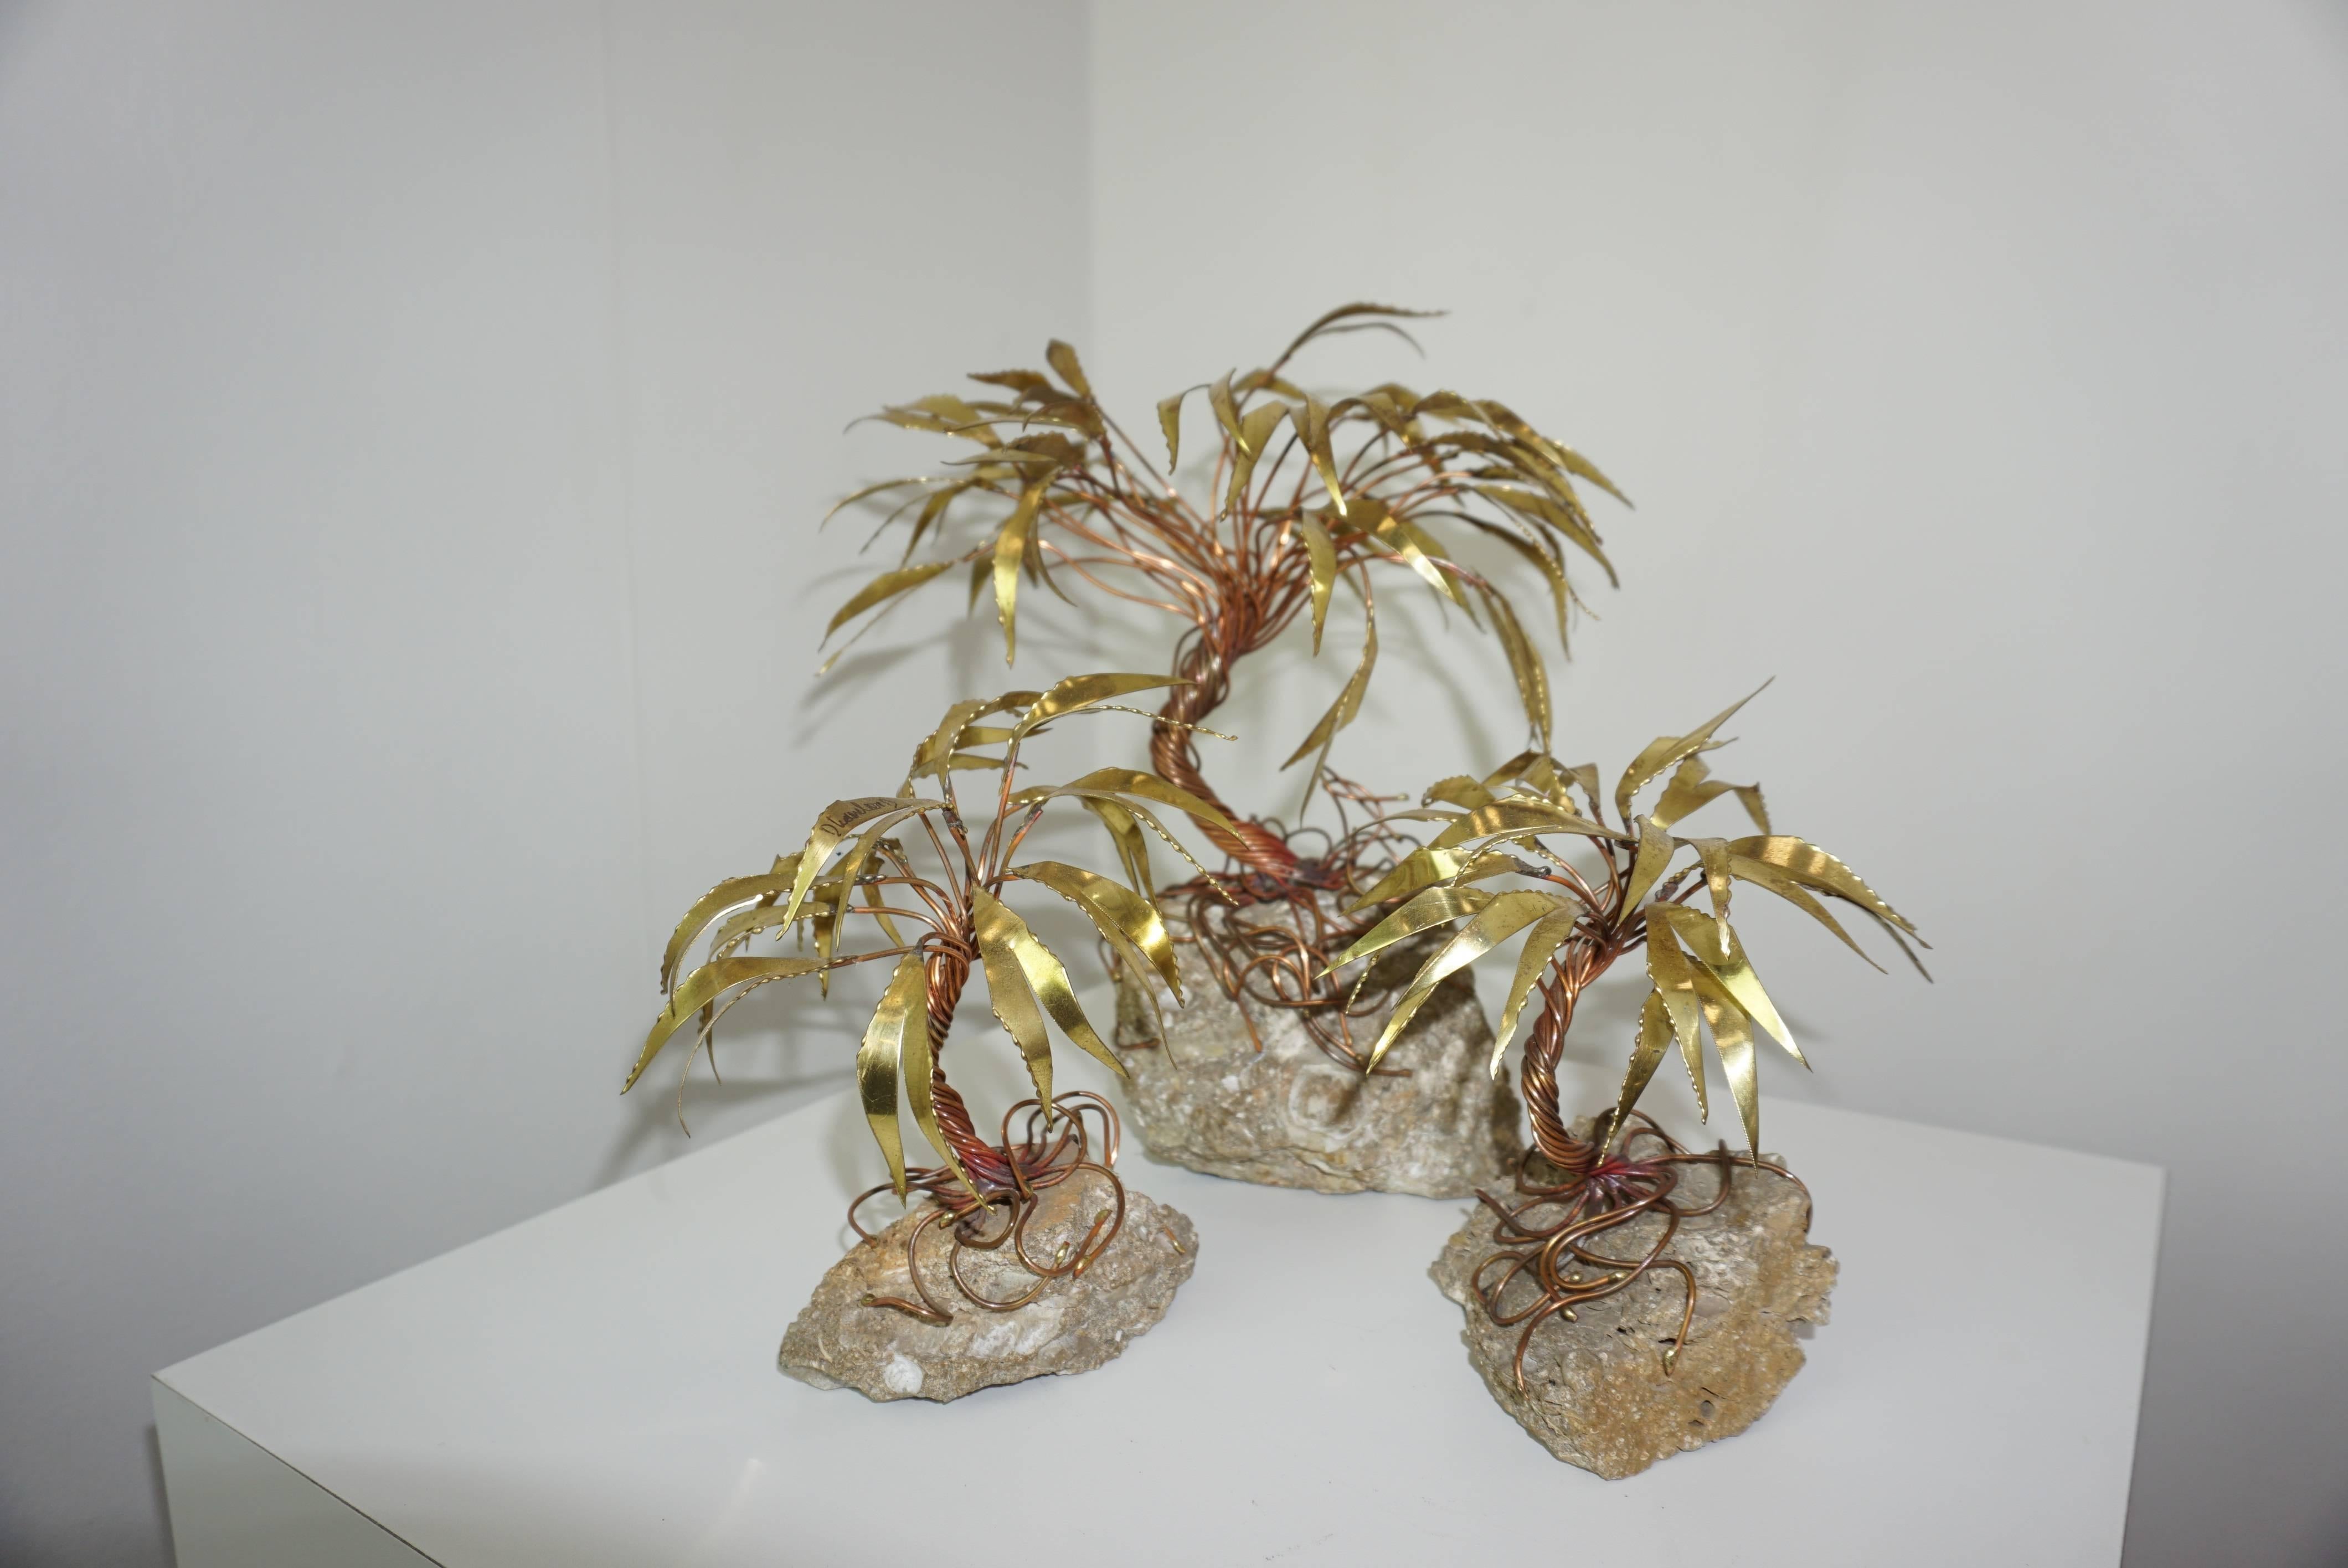 Palm Trees Forest / Vintage Sculptures by Daniel Dhaeseleer For Sale 3